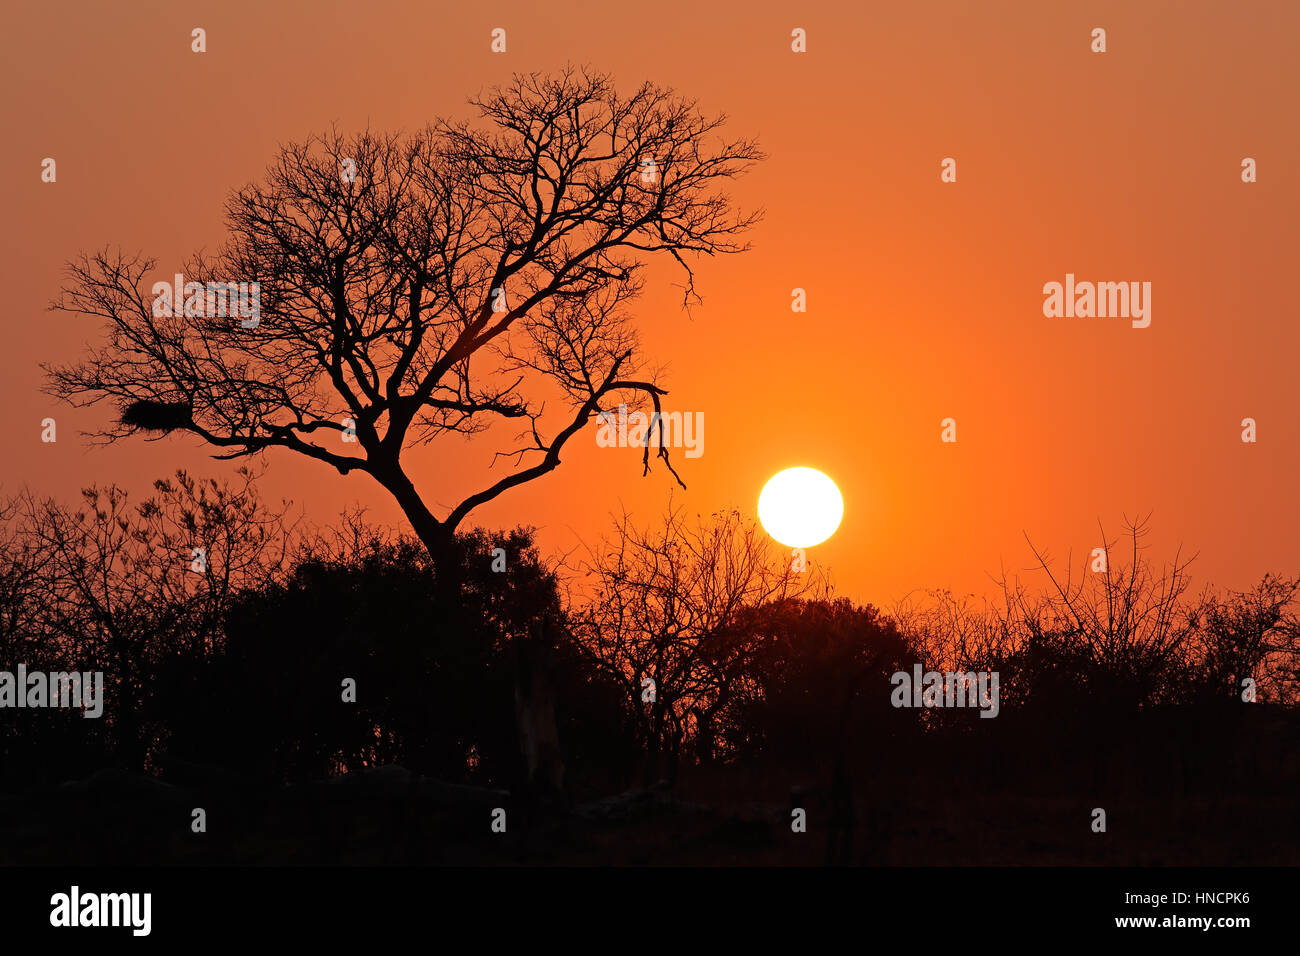 Sunrise with a silhouetted African savanna tree, Kruger National Park, South Africa Stock Photo